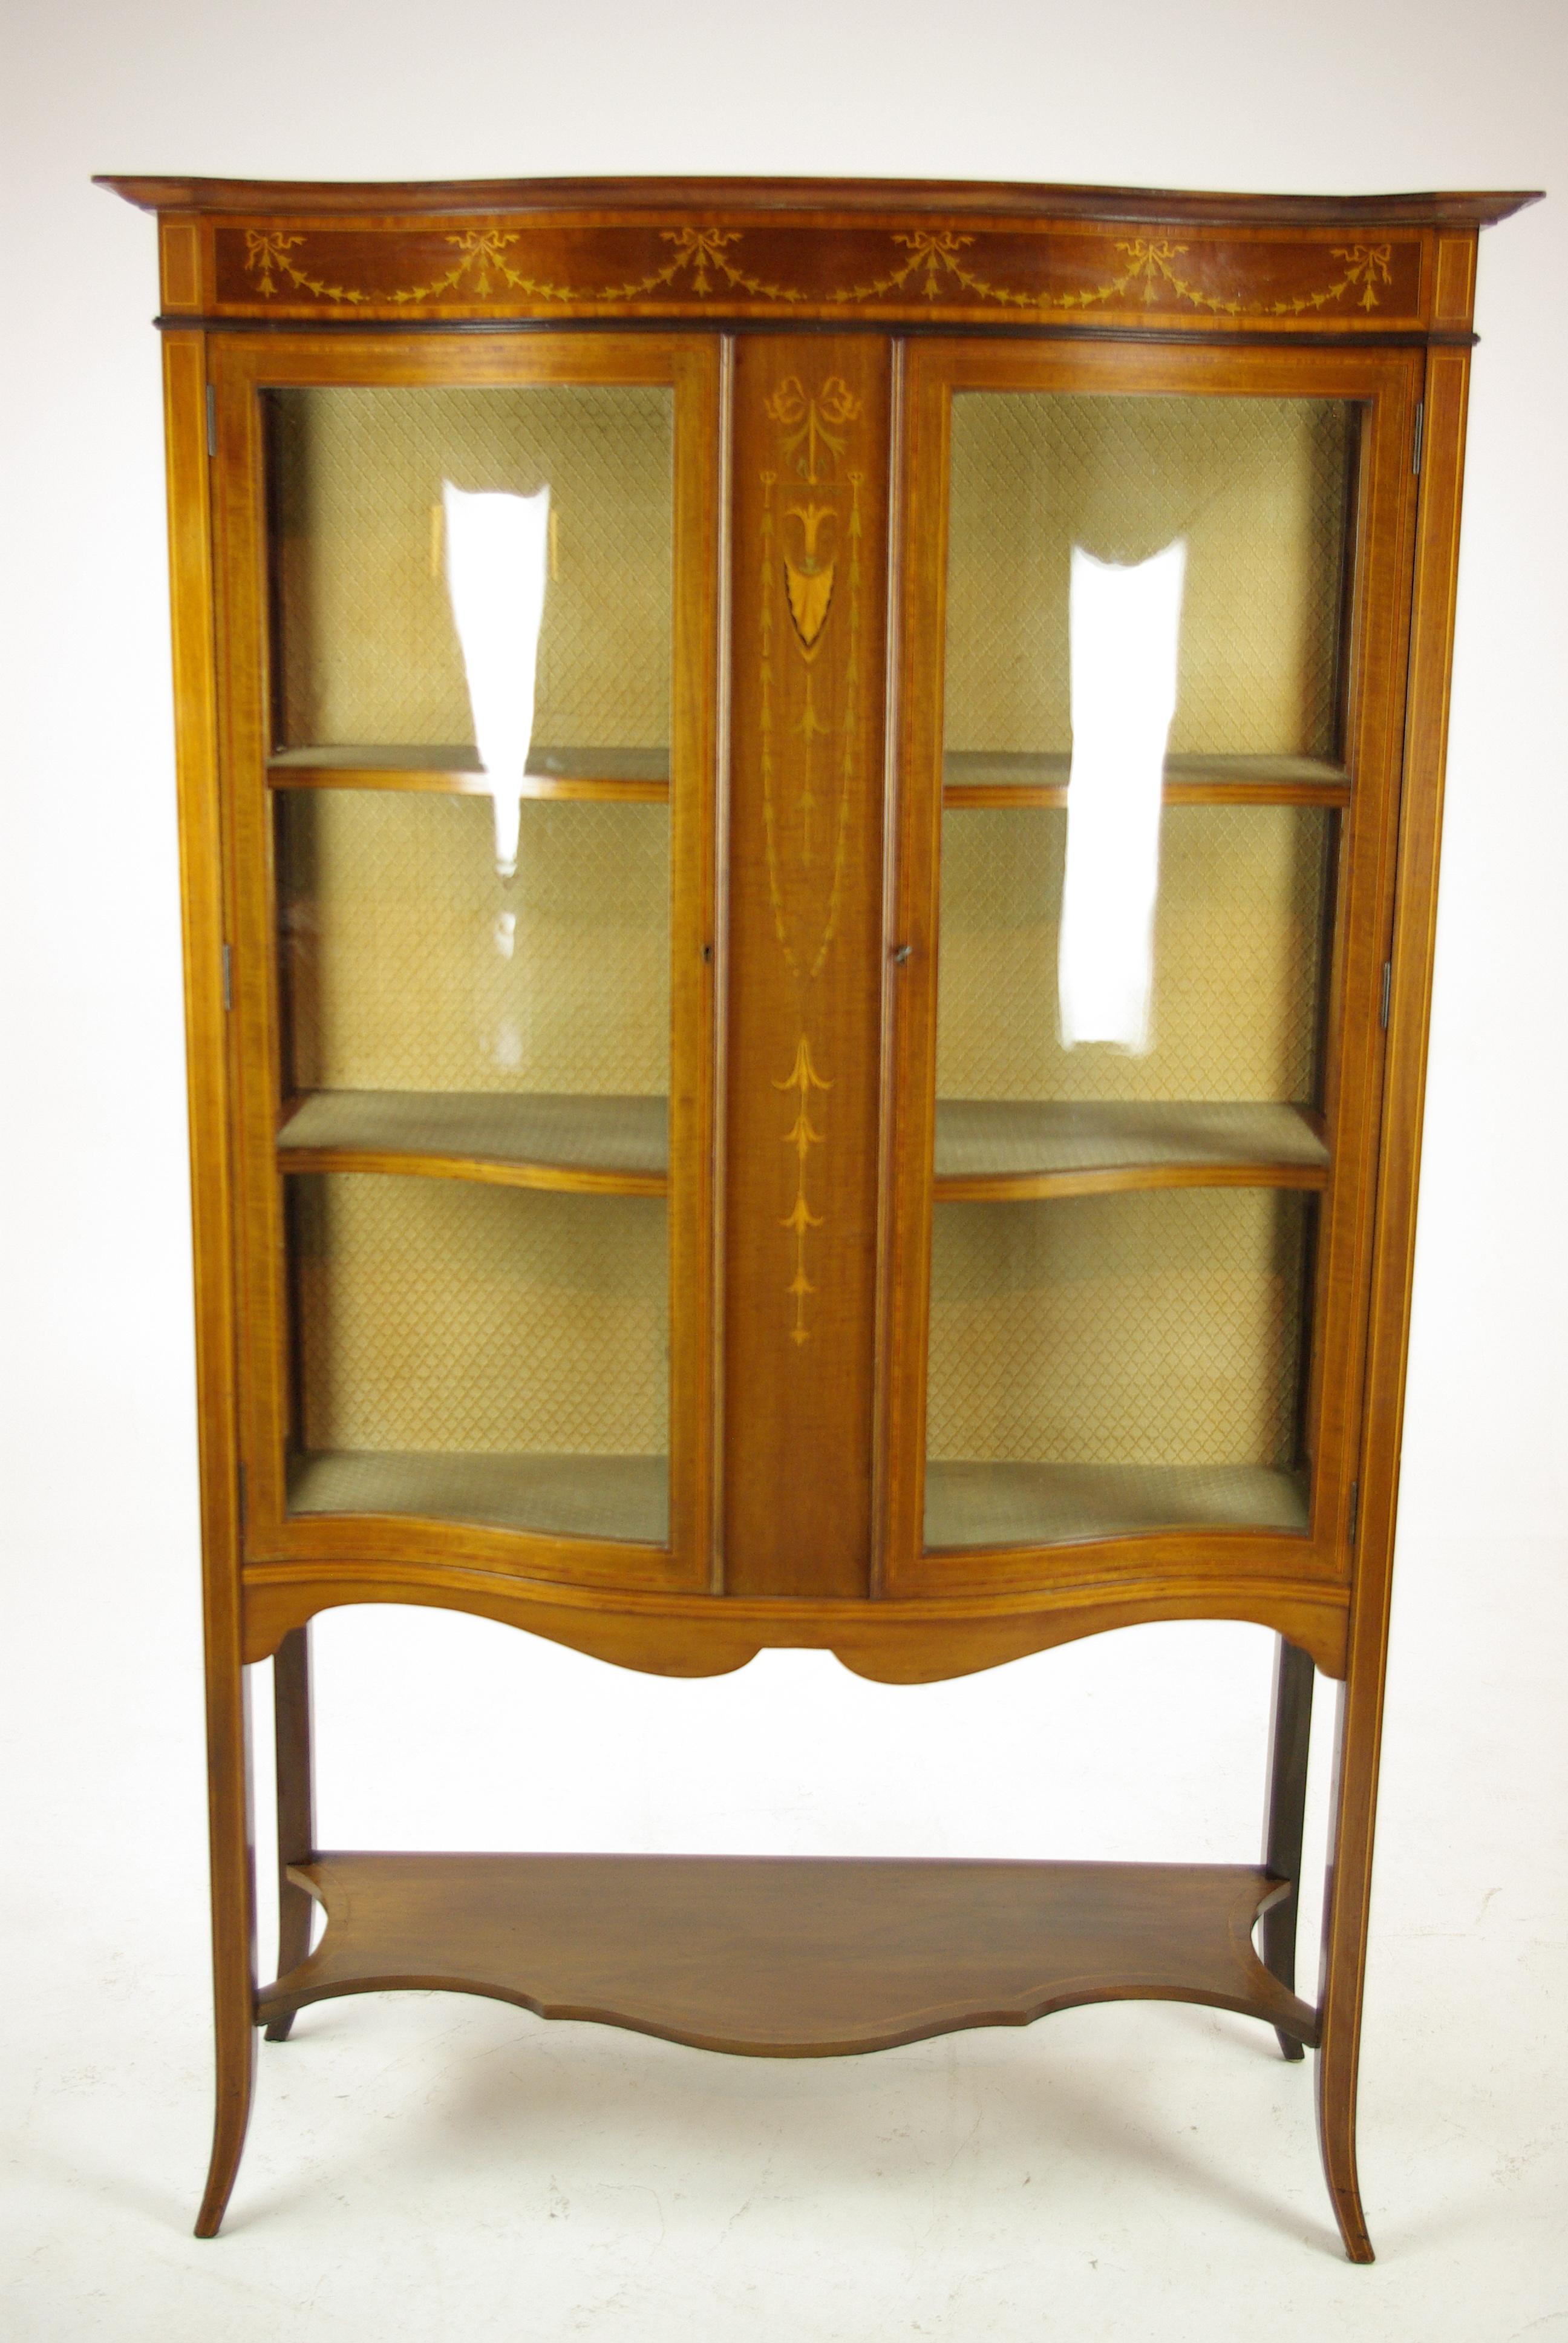 Antique China cabinet, walnut, bow front cabinet, Curio cabinet, Scotland 1910, Antique Furniture, B1276

Scotland, 1910
Solid walnut with satinwood veneers
Original finish
Serpentine Top
Inlaid frieze below
Central inlaid panel in